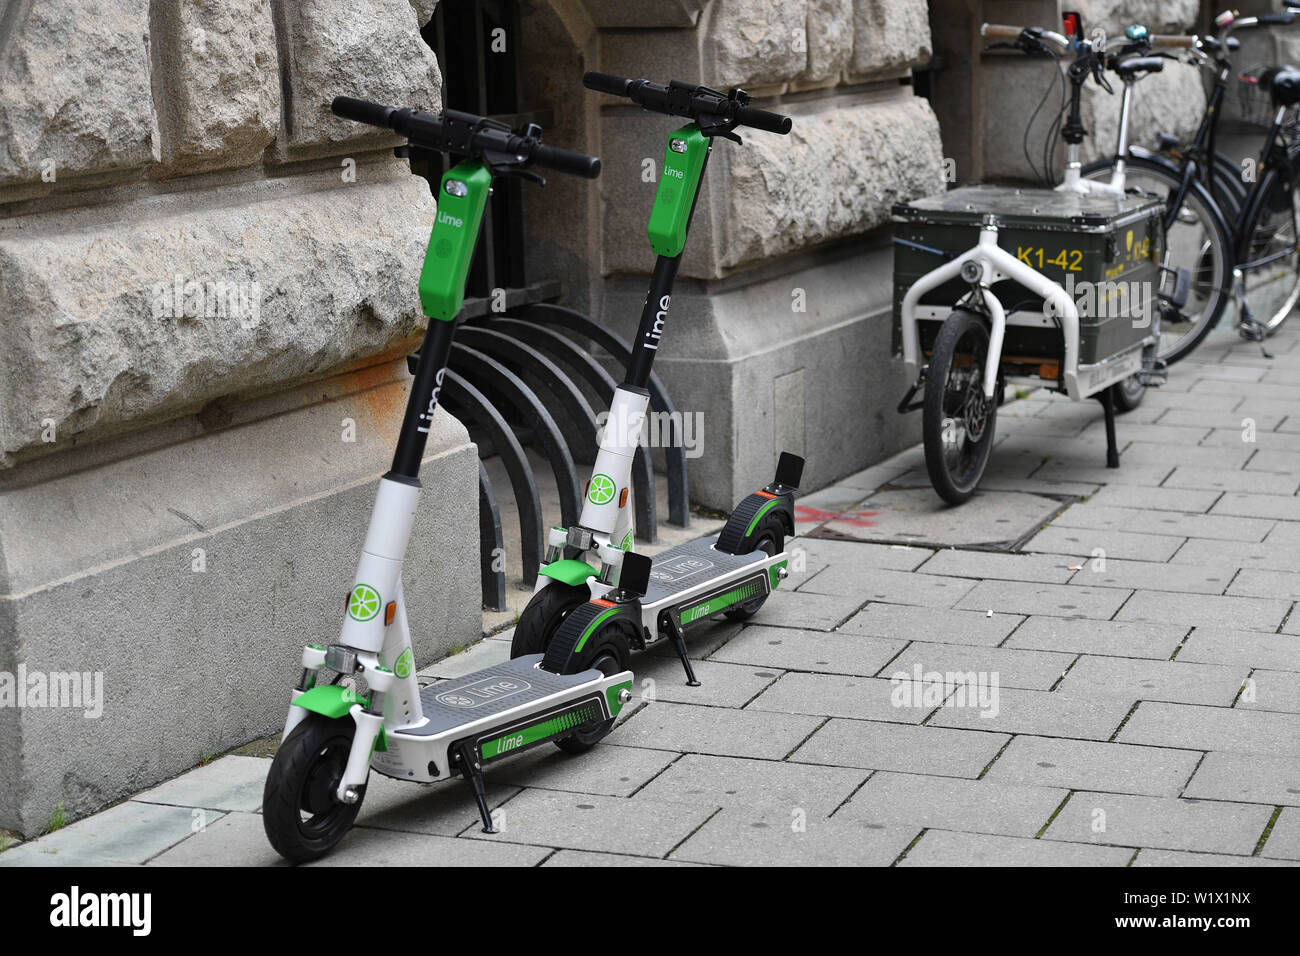 Munich, Deutschland. 02nd July, 2019. LimeBike, Lime Bike US e-scooter  rental company. E-scooters, electric scooters stand on a sidewalk in  downtown Munich. Leihroller, Mietroller, Mietscooter, Miettretroller. |  usage worldwide Credit: dpa/Alamy Live